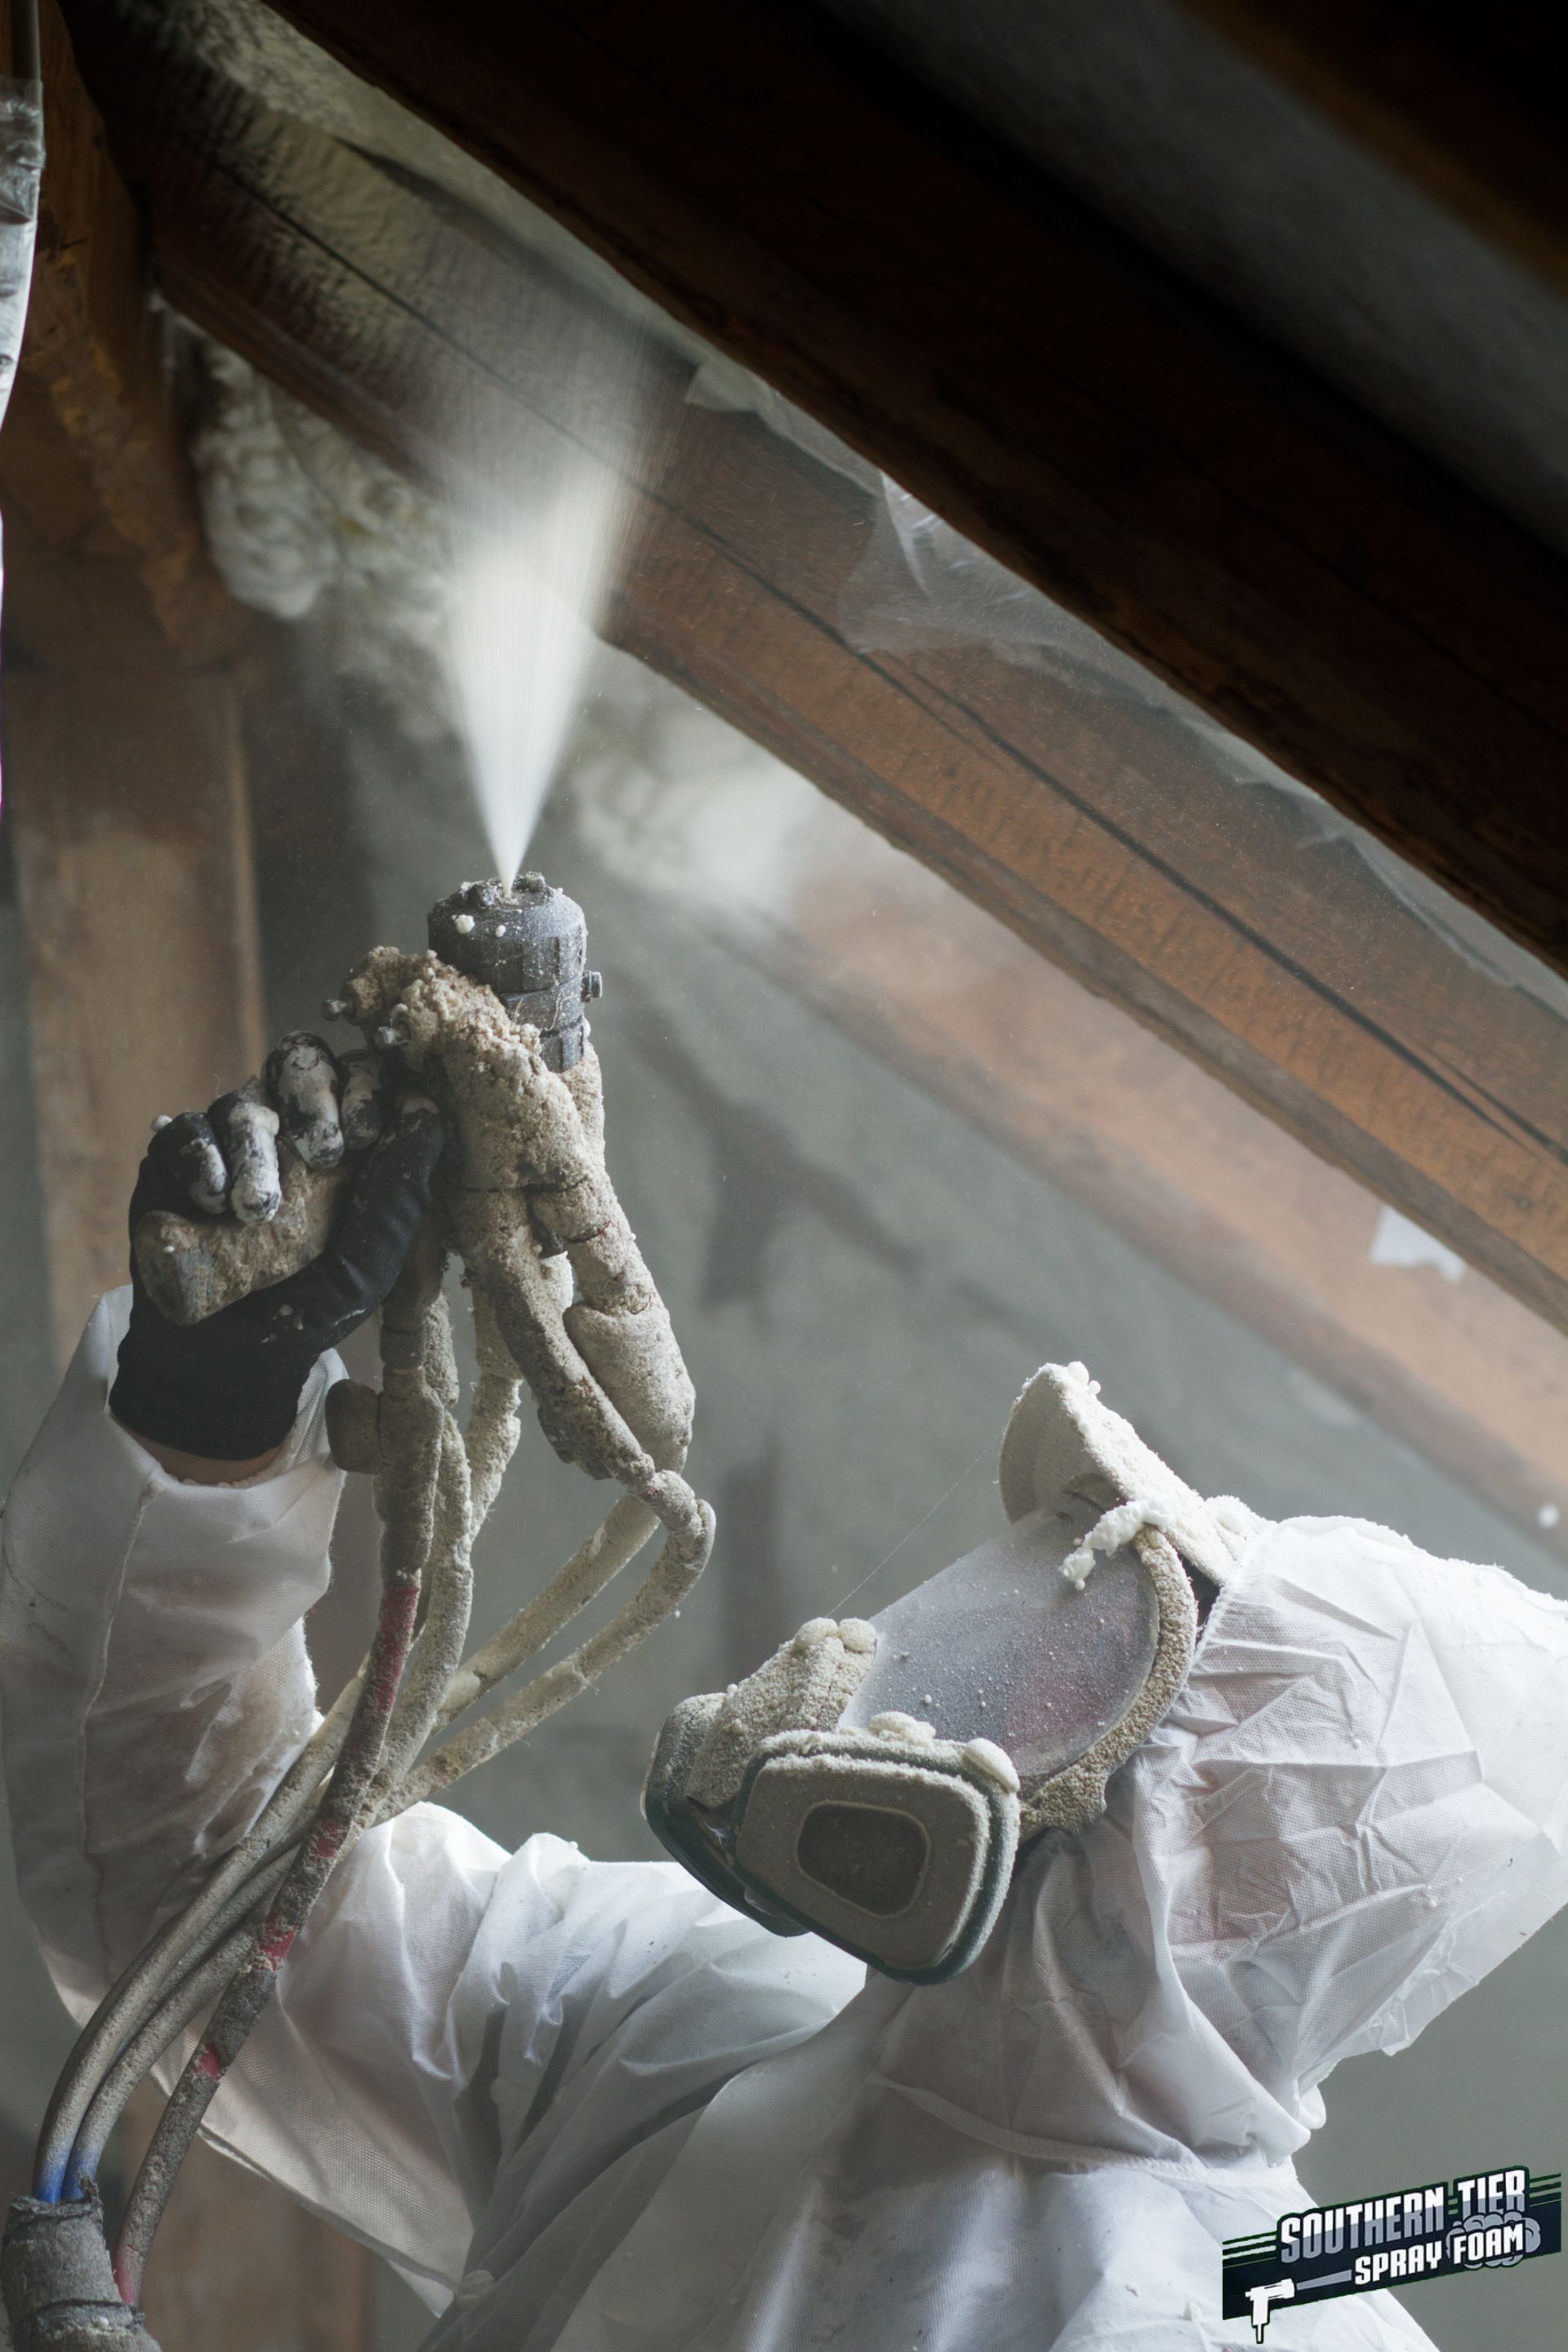 Workers applying spray foam insulation in a commercial building in Olean, NY